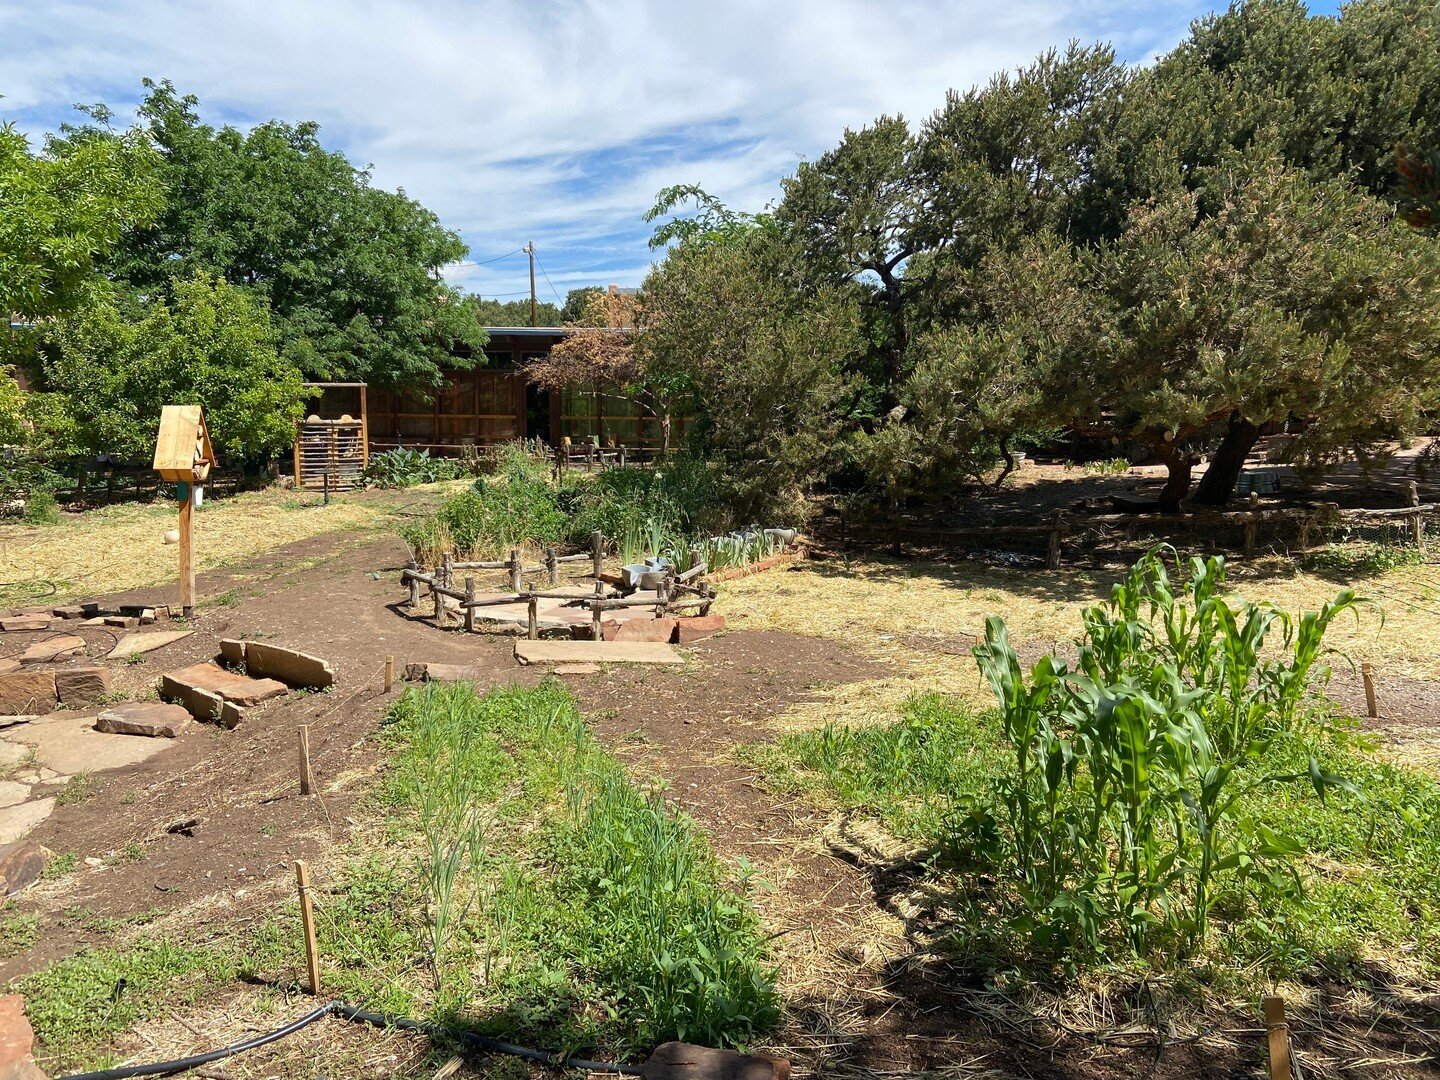 The recent rain has been a blessing for our garden! Join us on Tuesday, June 28th for our community garden work day from 12-3 pm. Help us make our garden even more beautiful and fruitful!

#santafewaldorfschool #schoolgarden